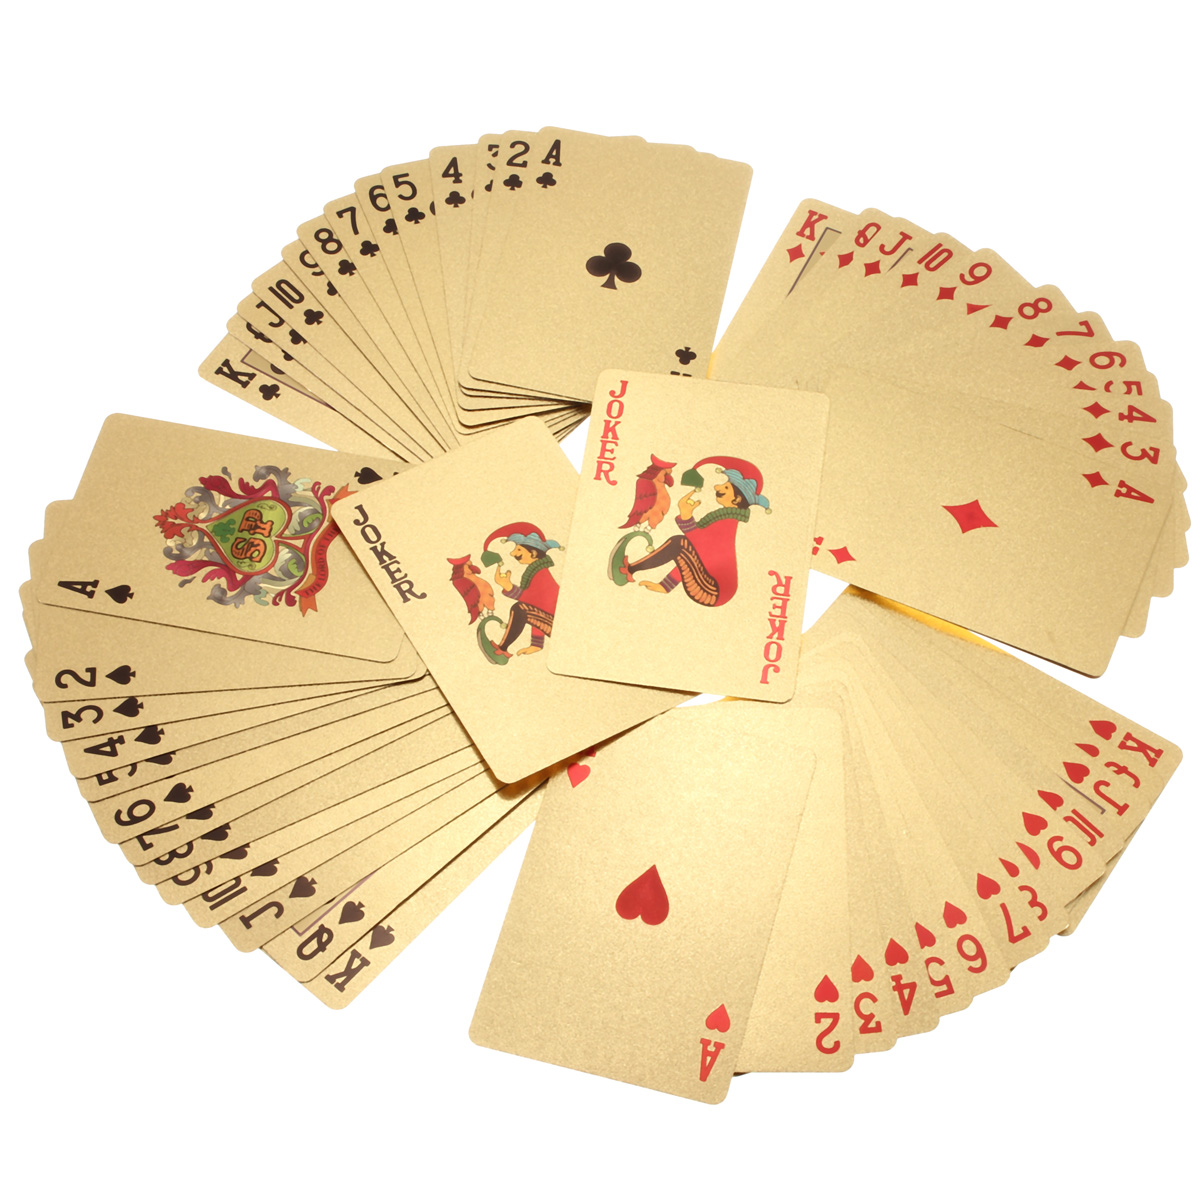 24K-Carat-Gold-Foil-Plated-Poker-Game-Playing-Cards-Gift-Collection-Certificate-982042